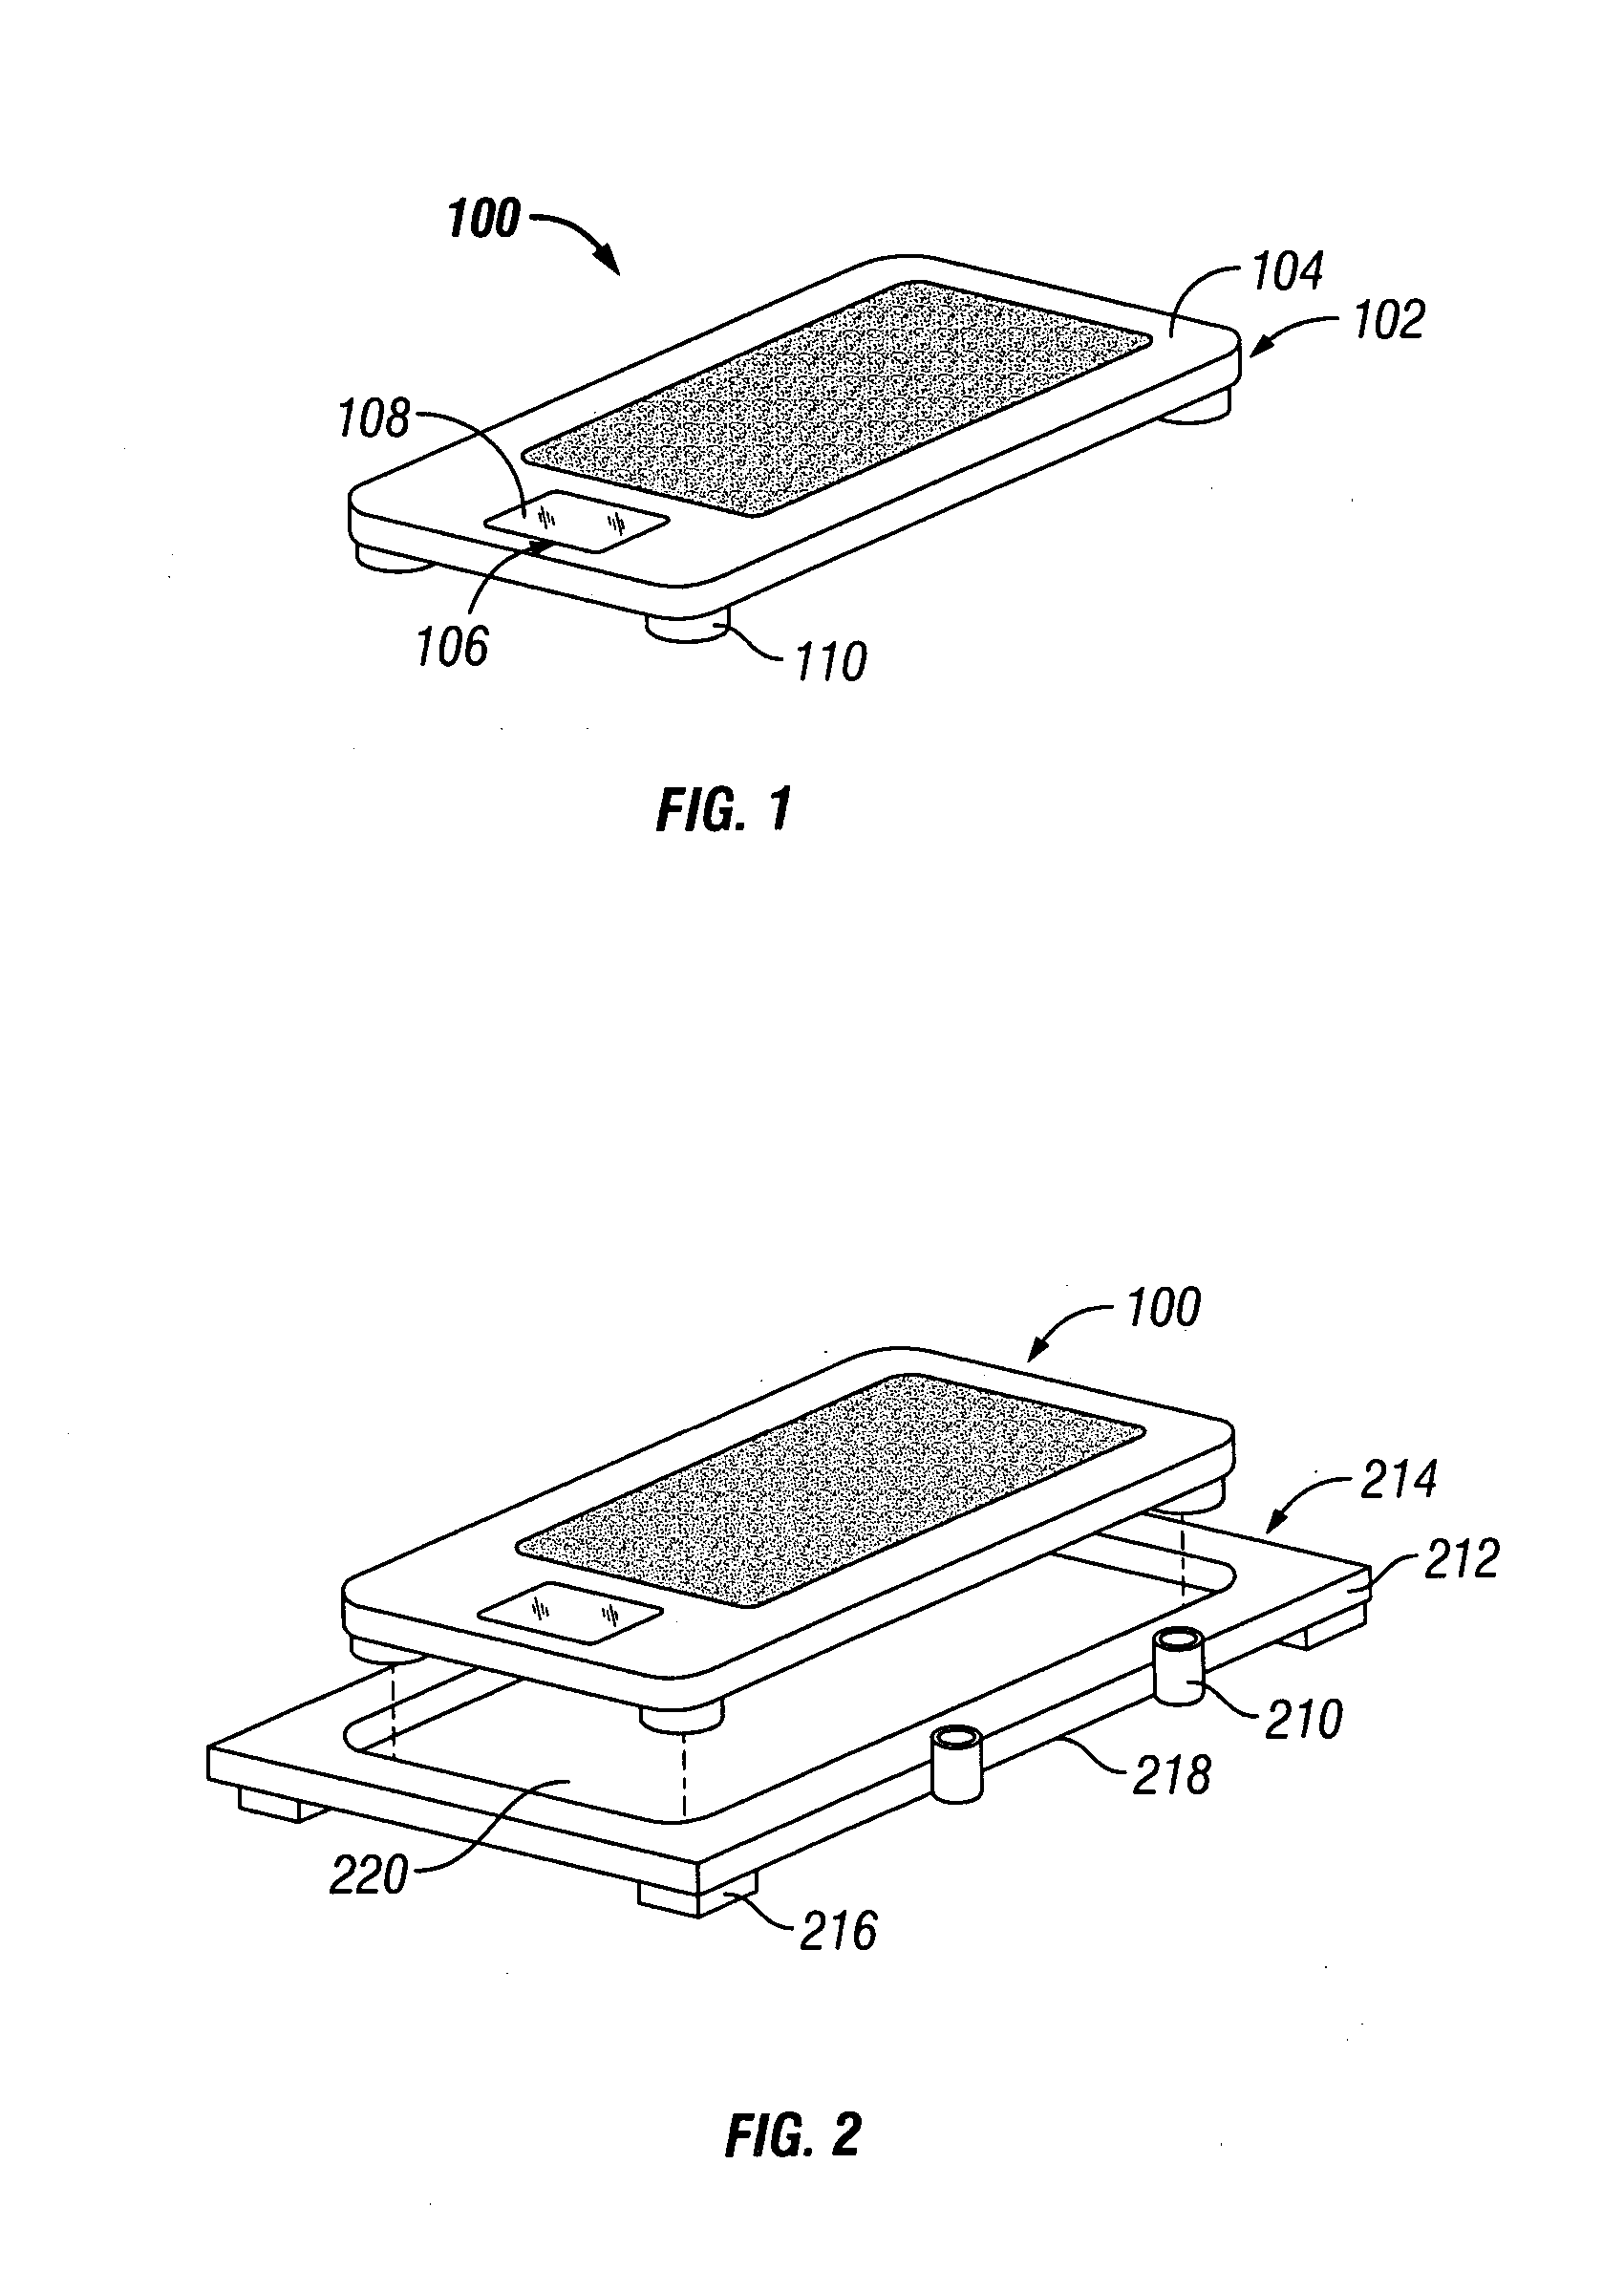 Supplemental support structures adapted to receive a non-invasive dynamic motion therapy device